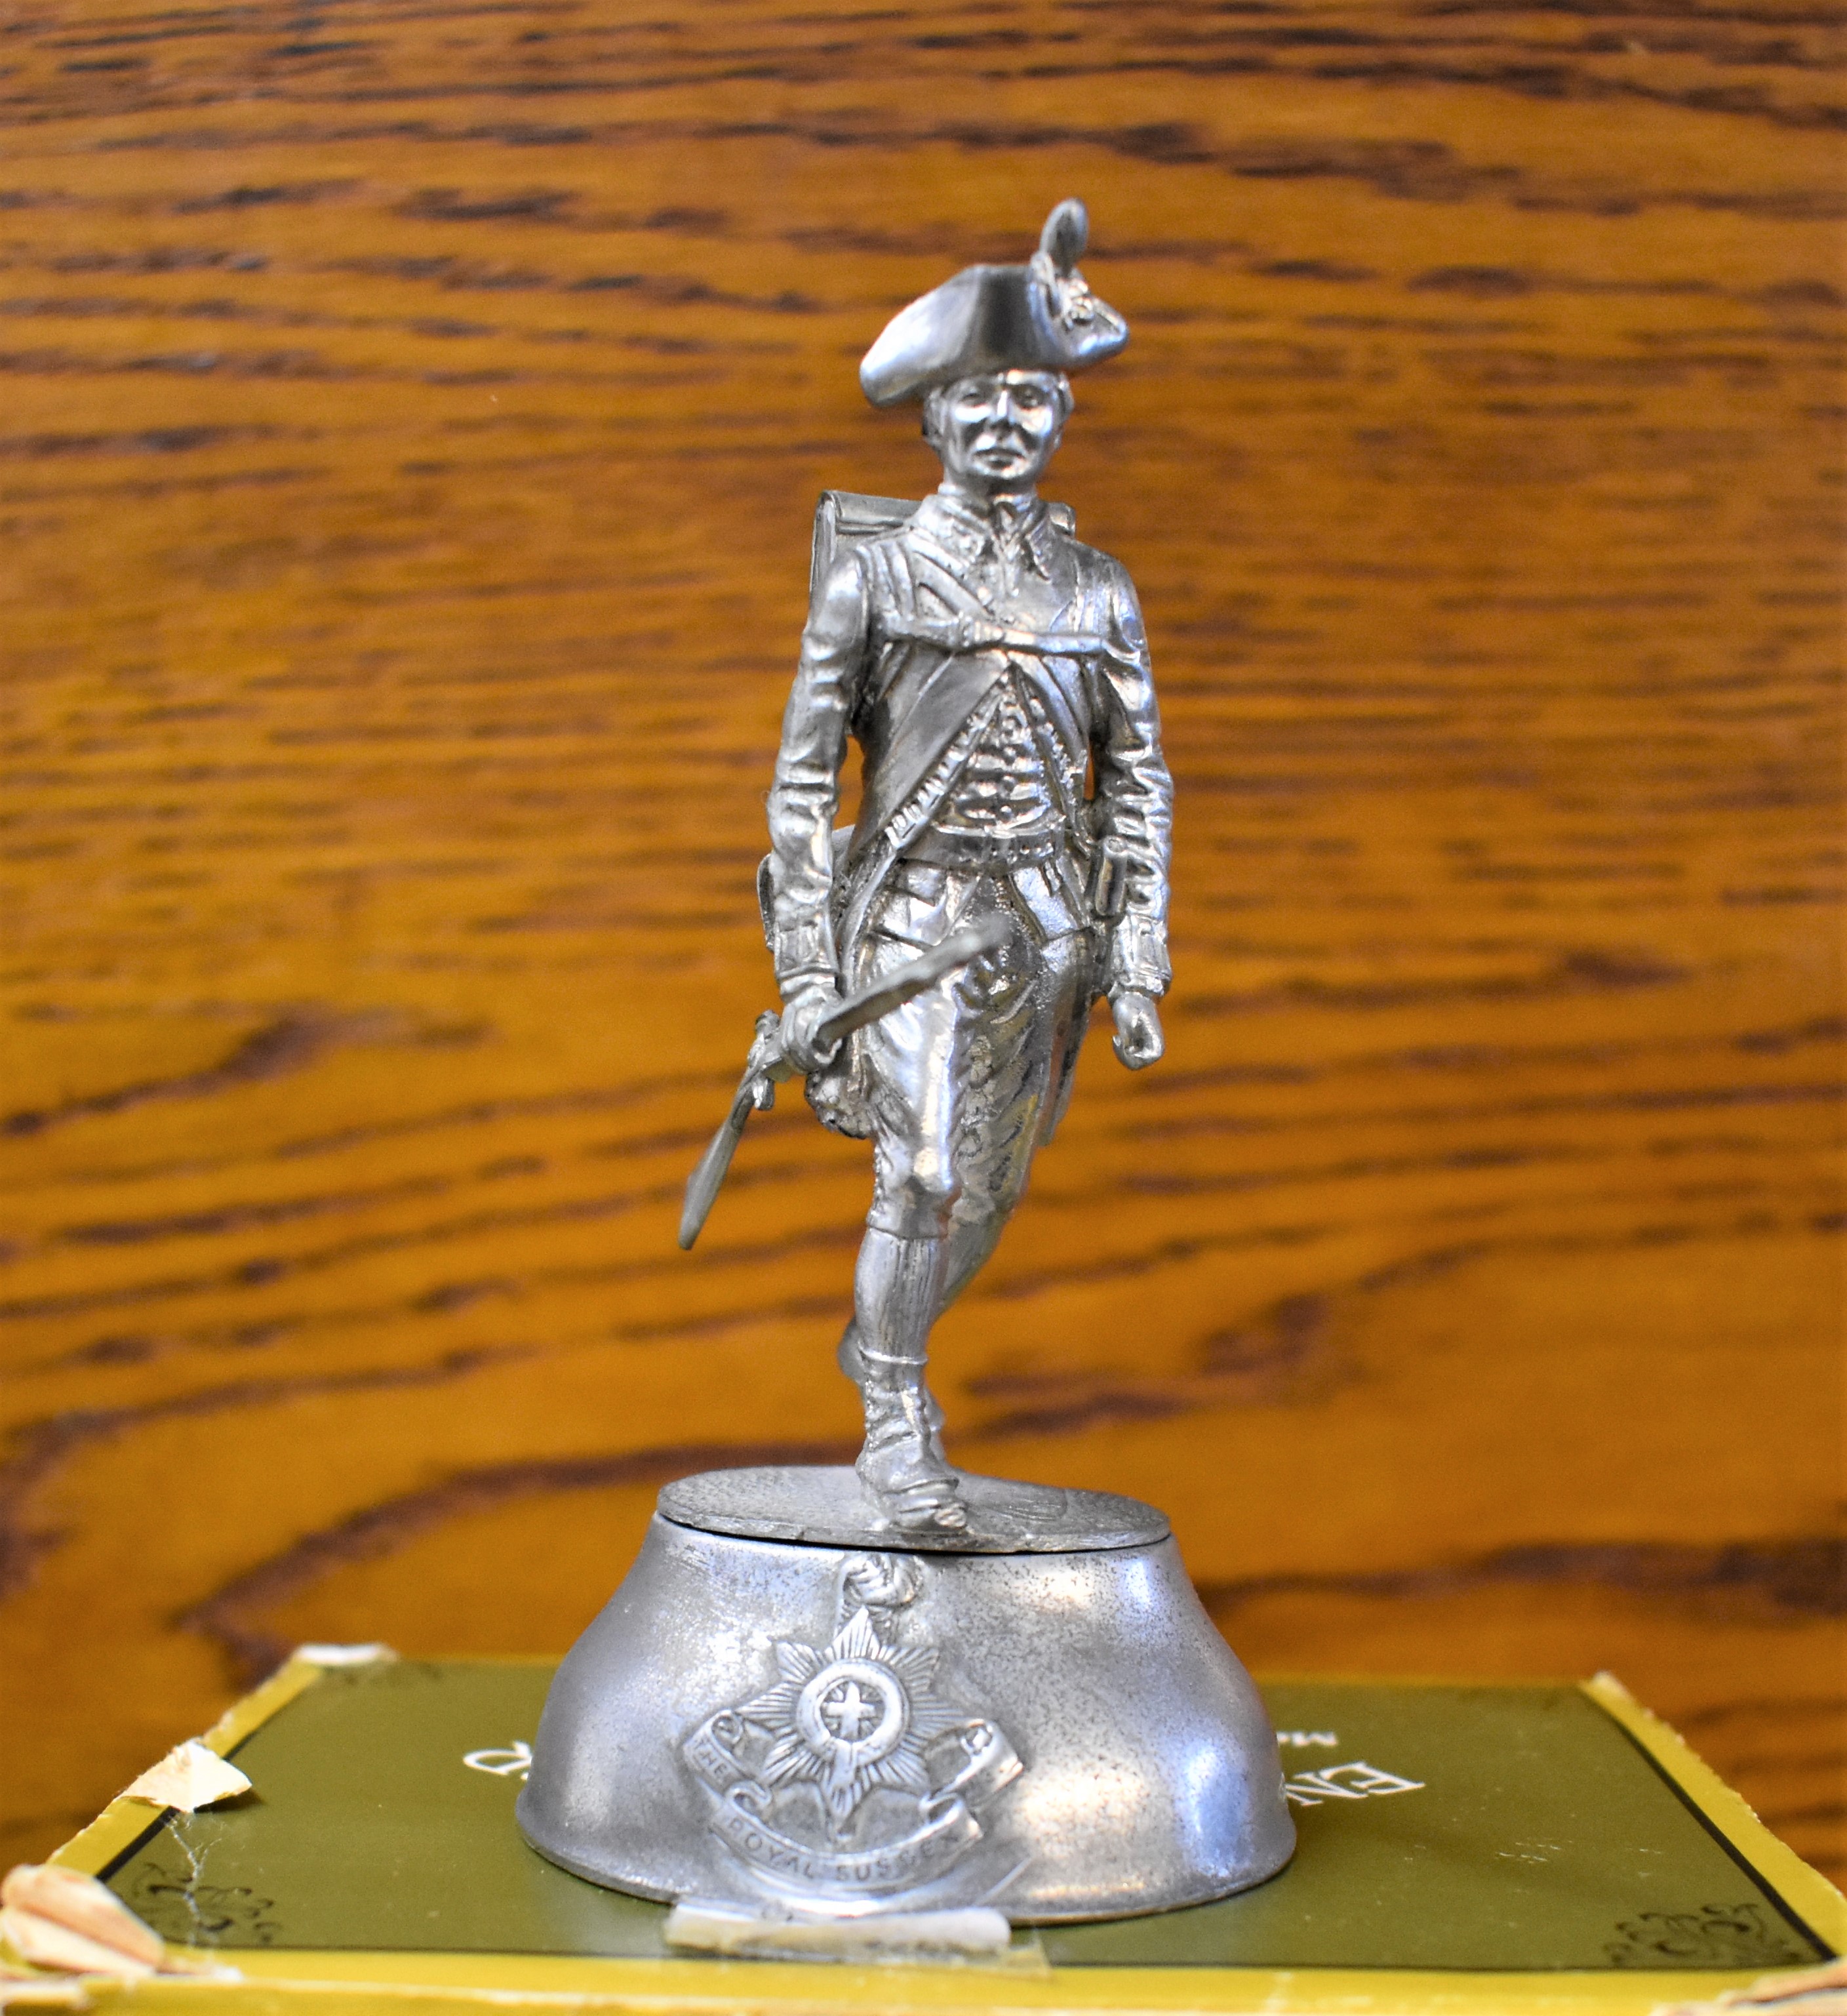 Buckingham Fine English Pewter Figure - Royal Sussex Soldier in original box, approx 10cm's